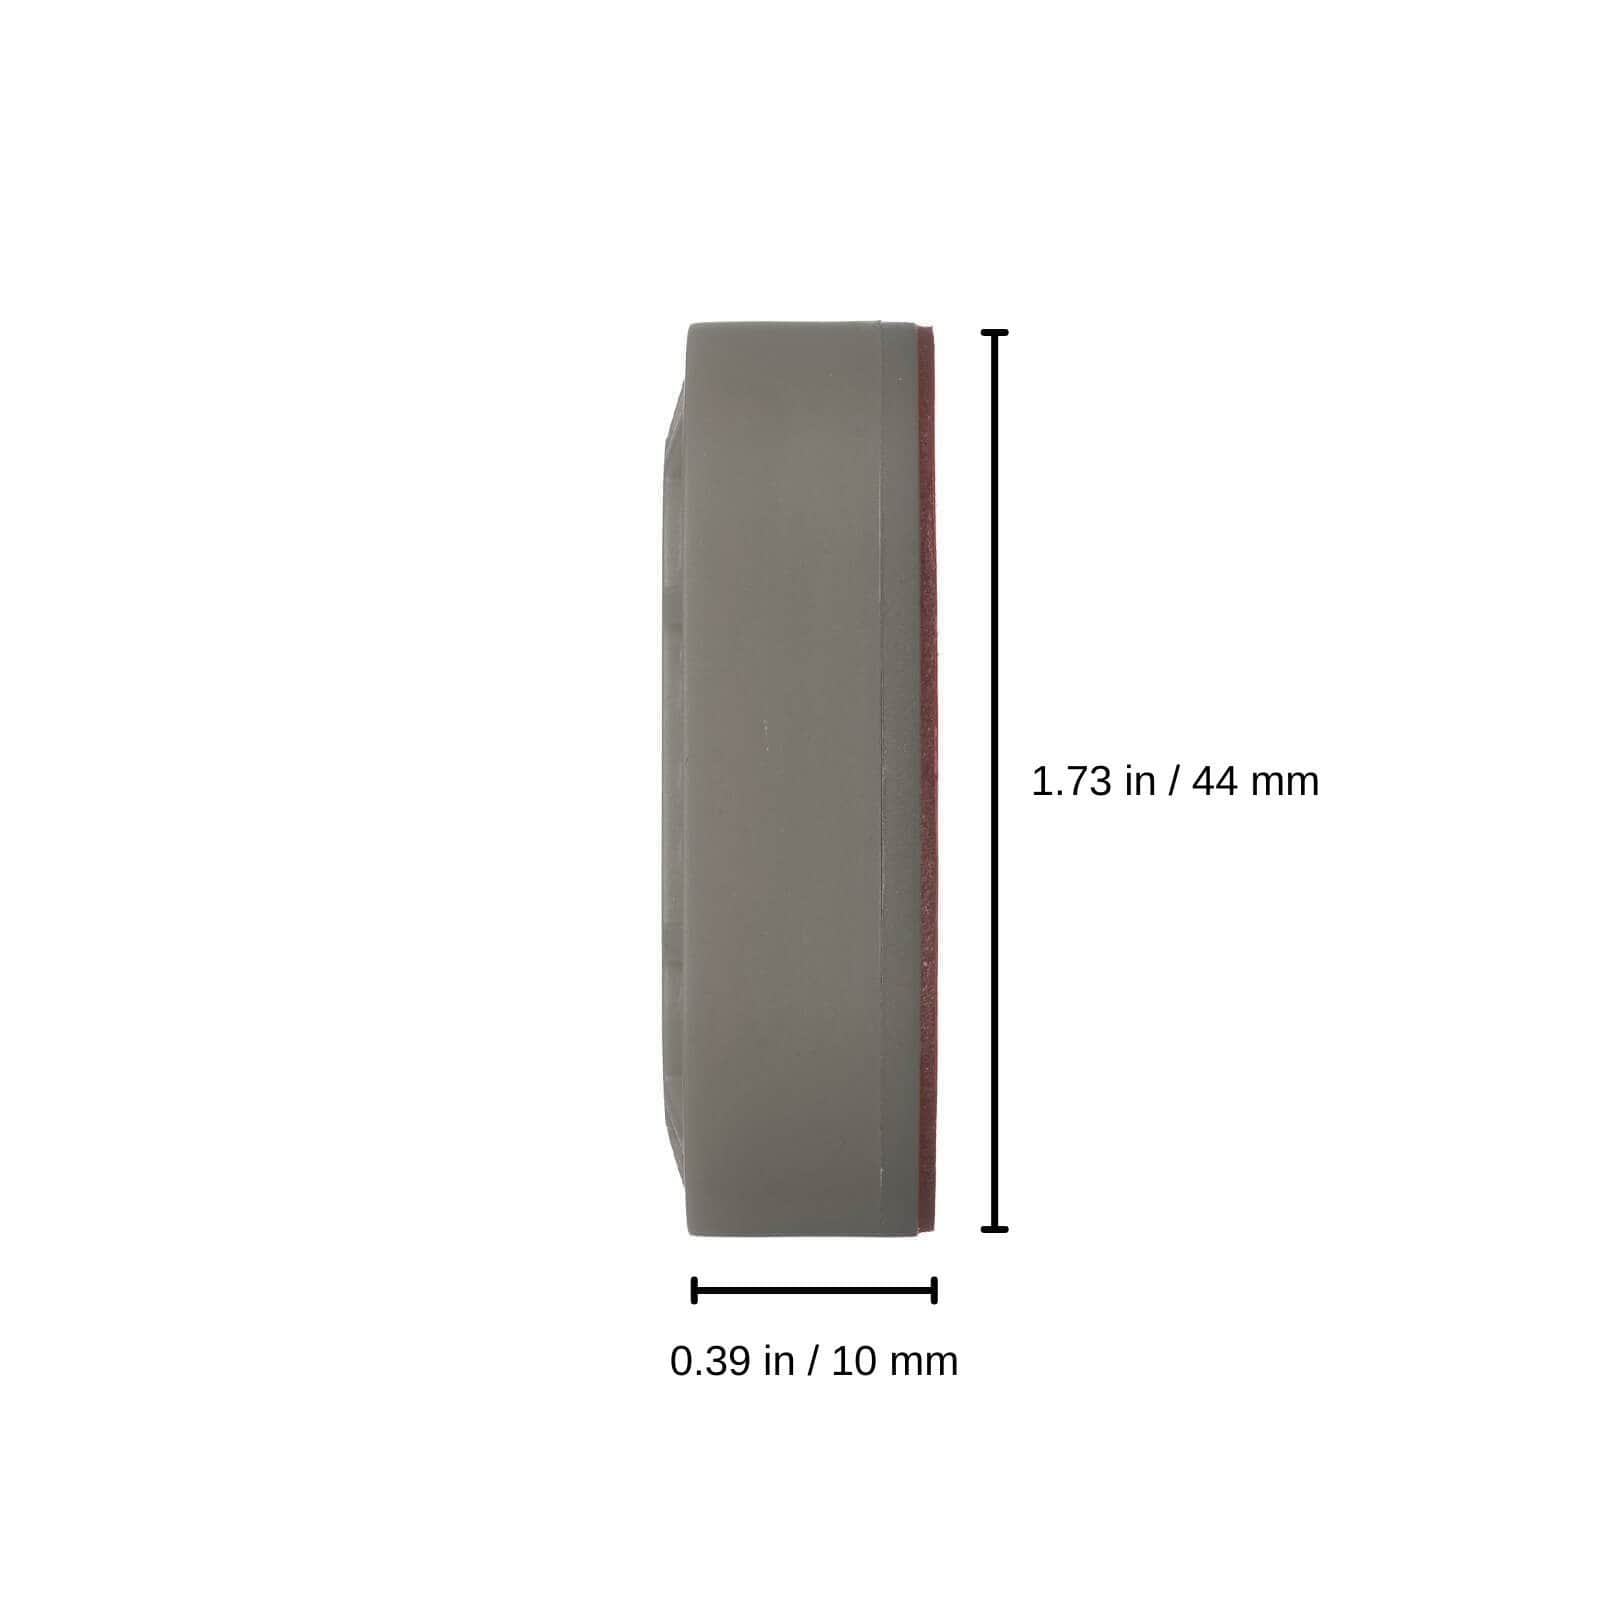 0.39 in / 10 mm x 1.73 / 44 mm color::Gray